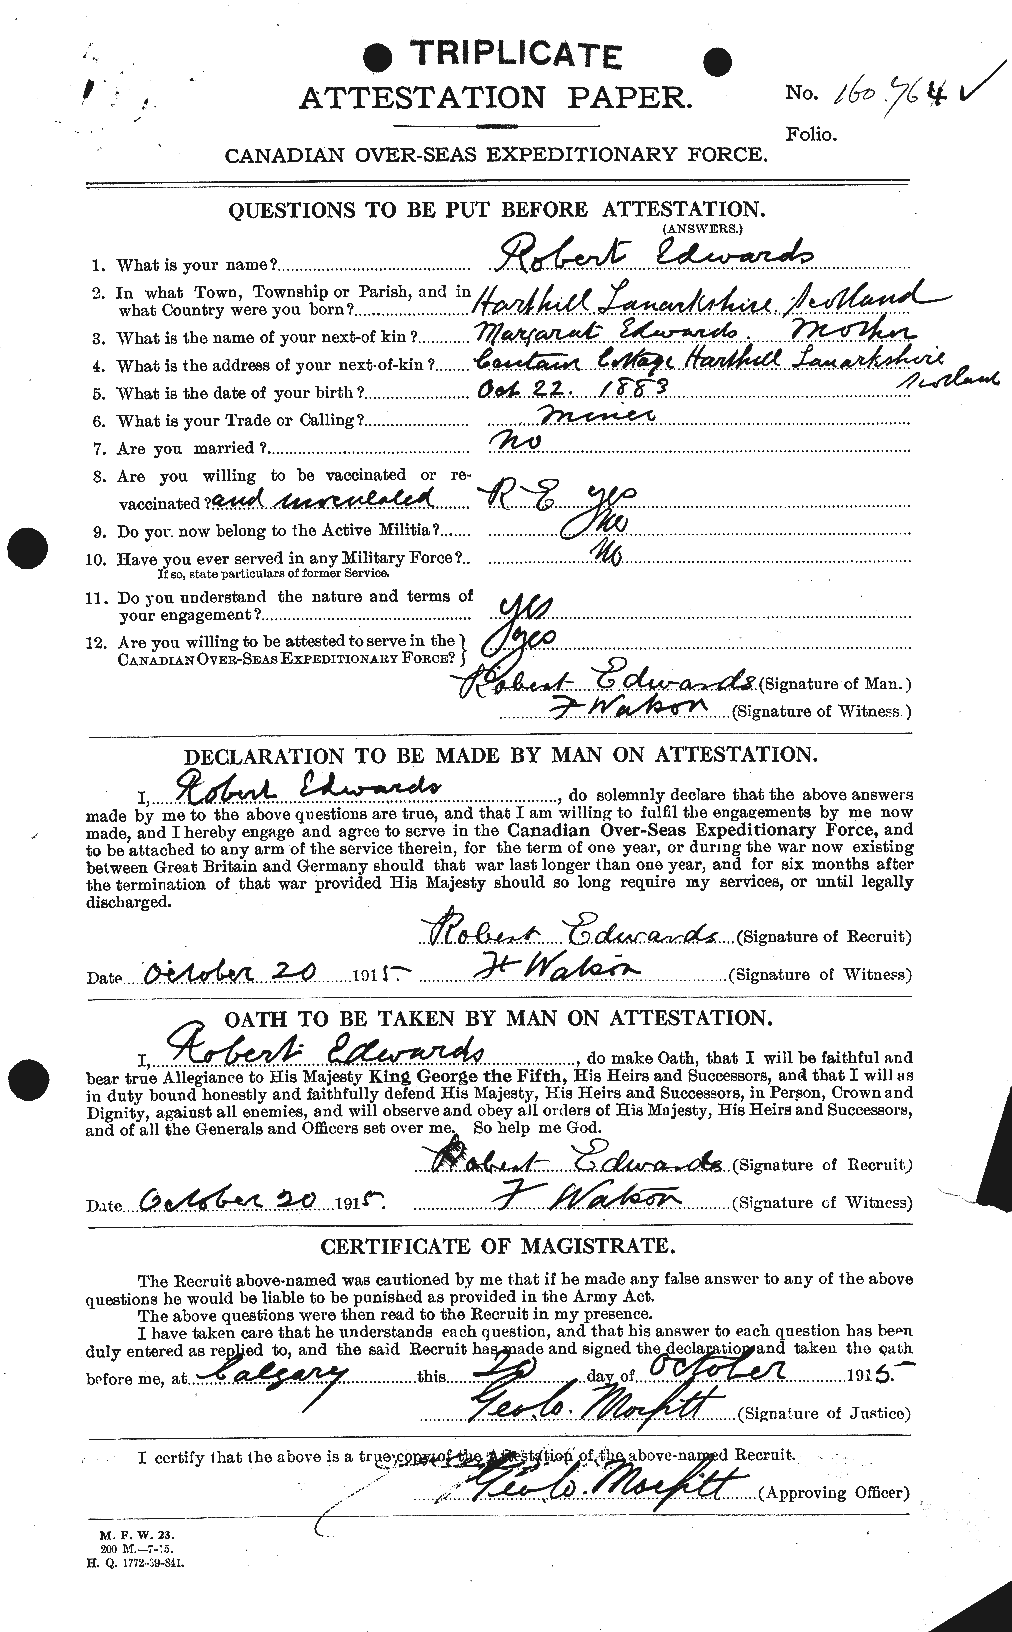 Personnel Records of the First World War - CEF 310269a